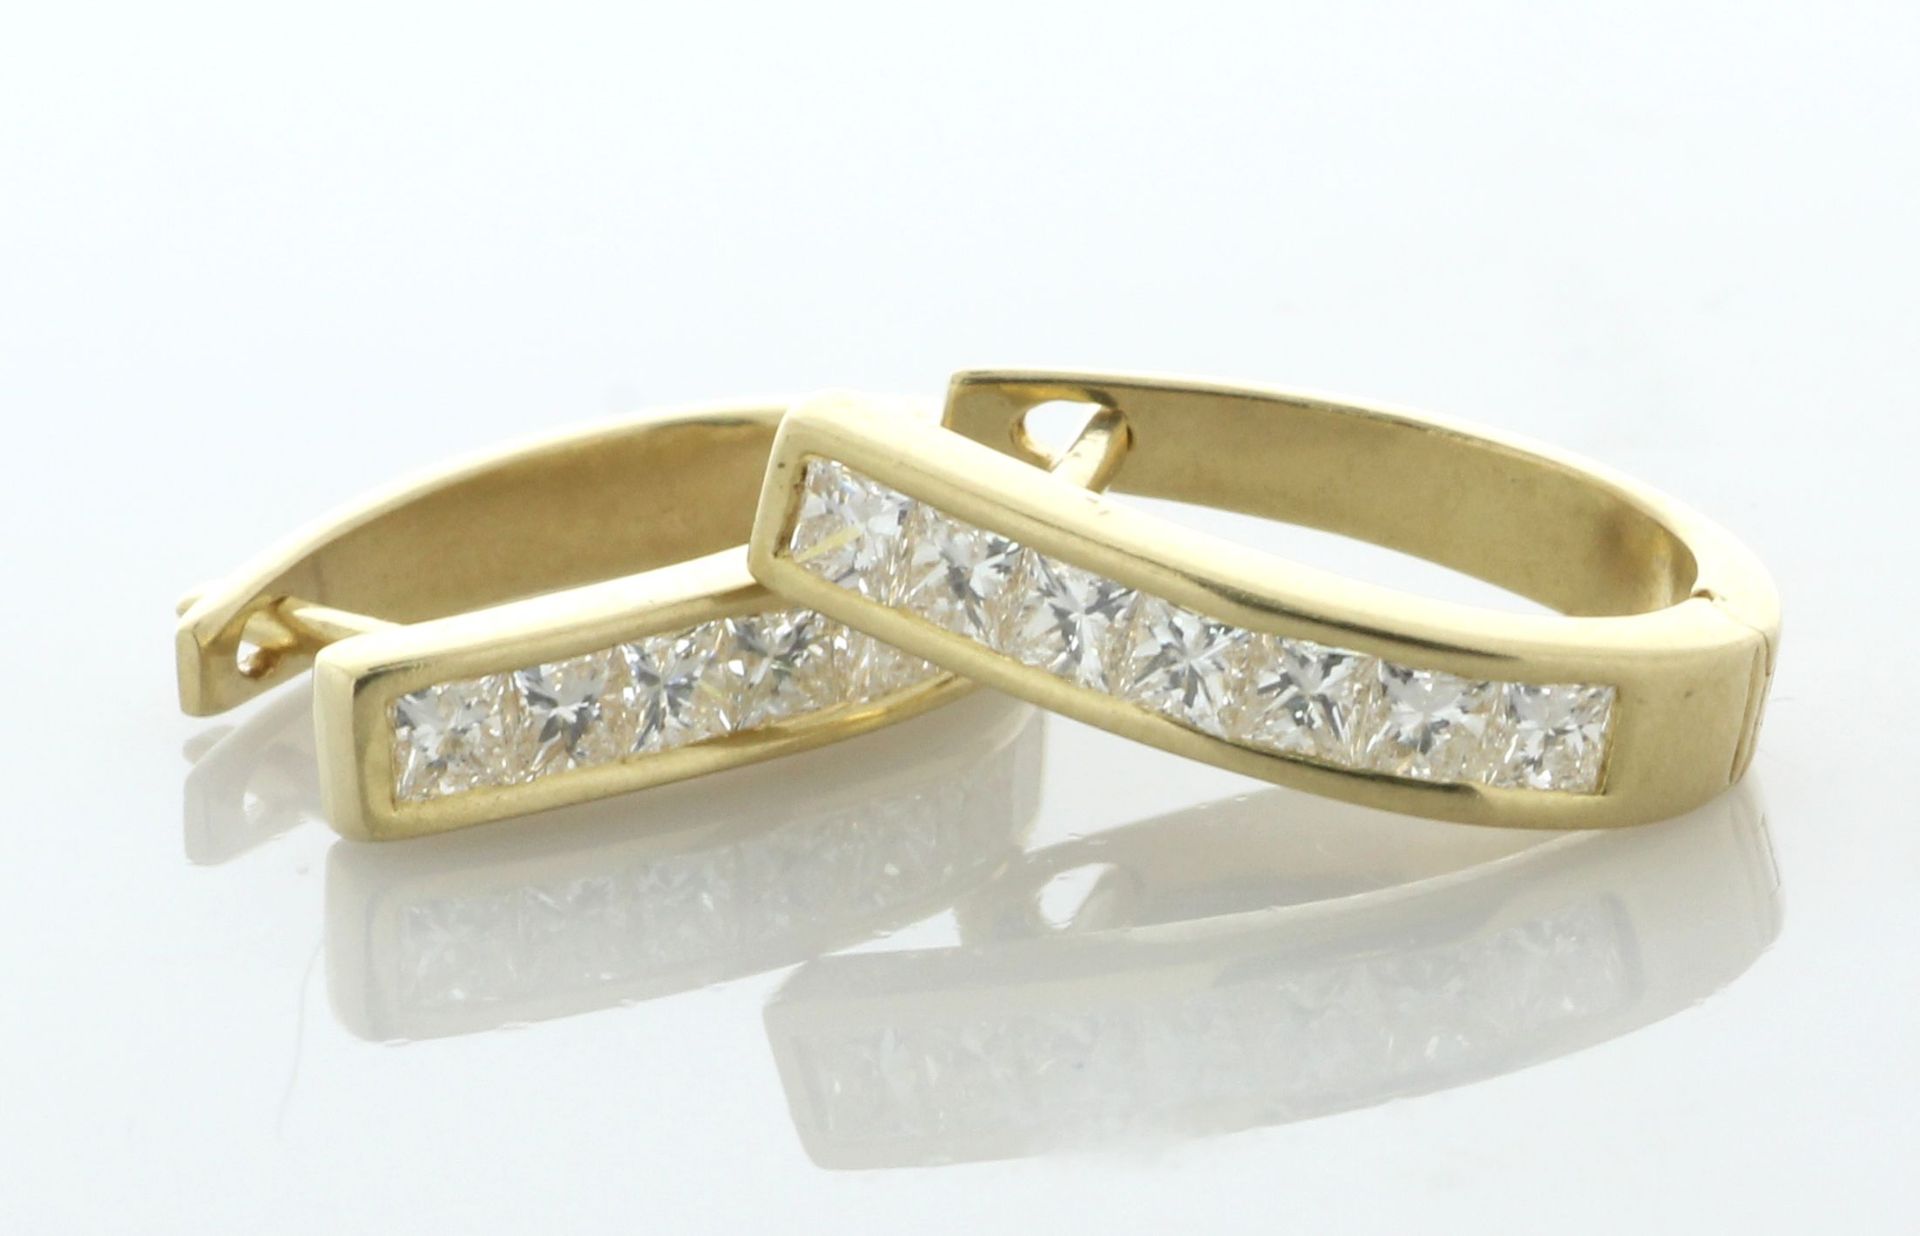 18ct Yellow Gold Oval Hoop Diamond Earring 0.80 Carats - Valued By AGI £3,880.00 - Each of these